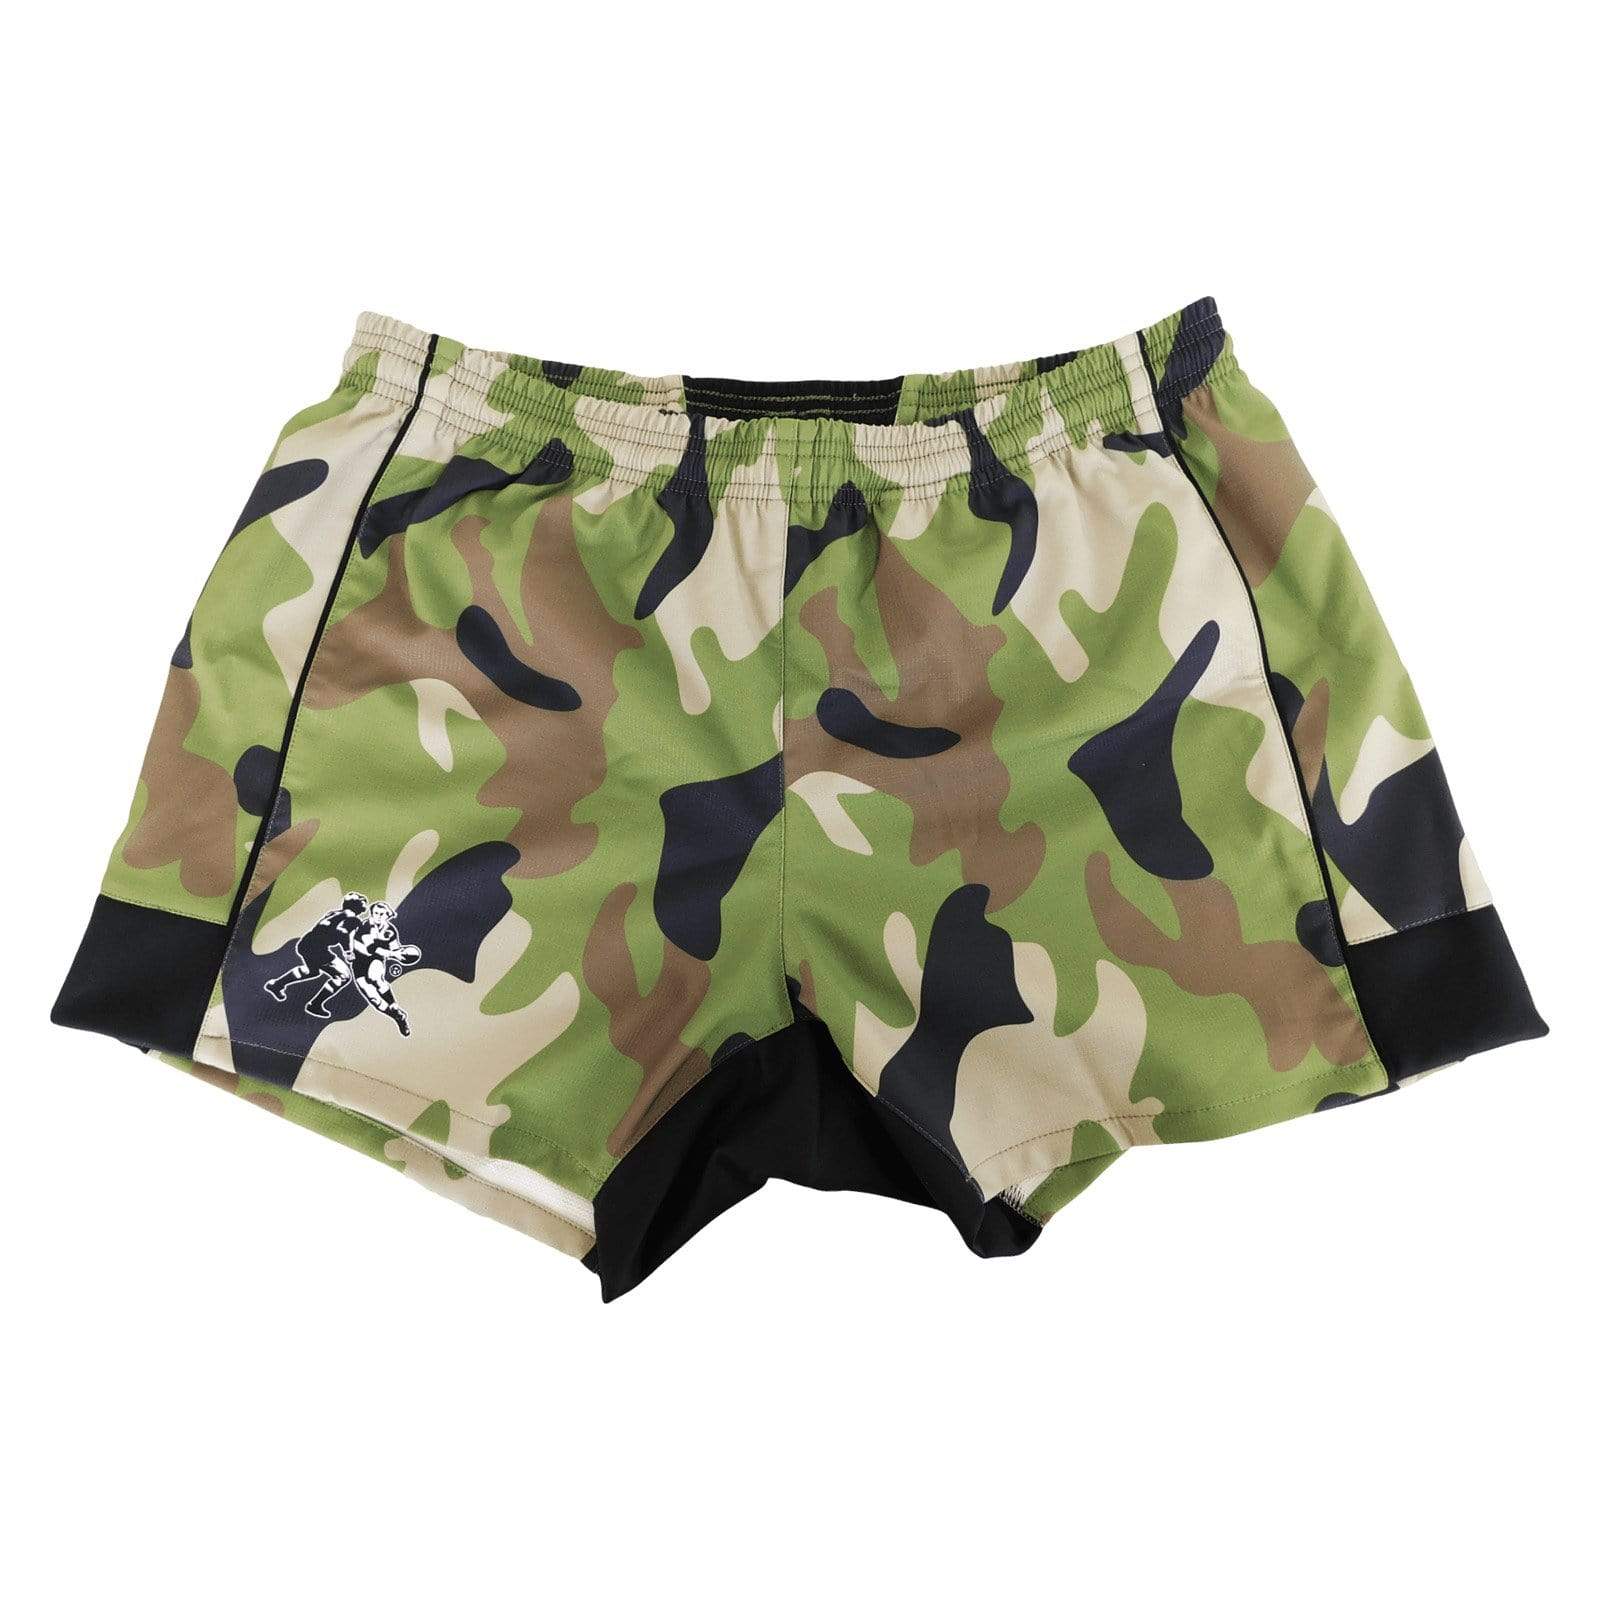 Rugby Imports Camo Pro XV Rugby Shorts